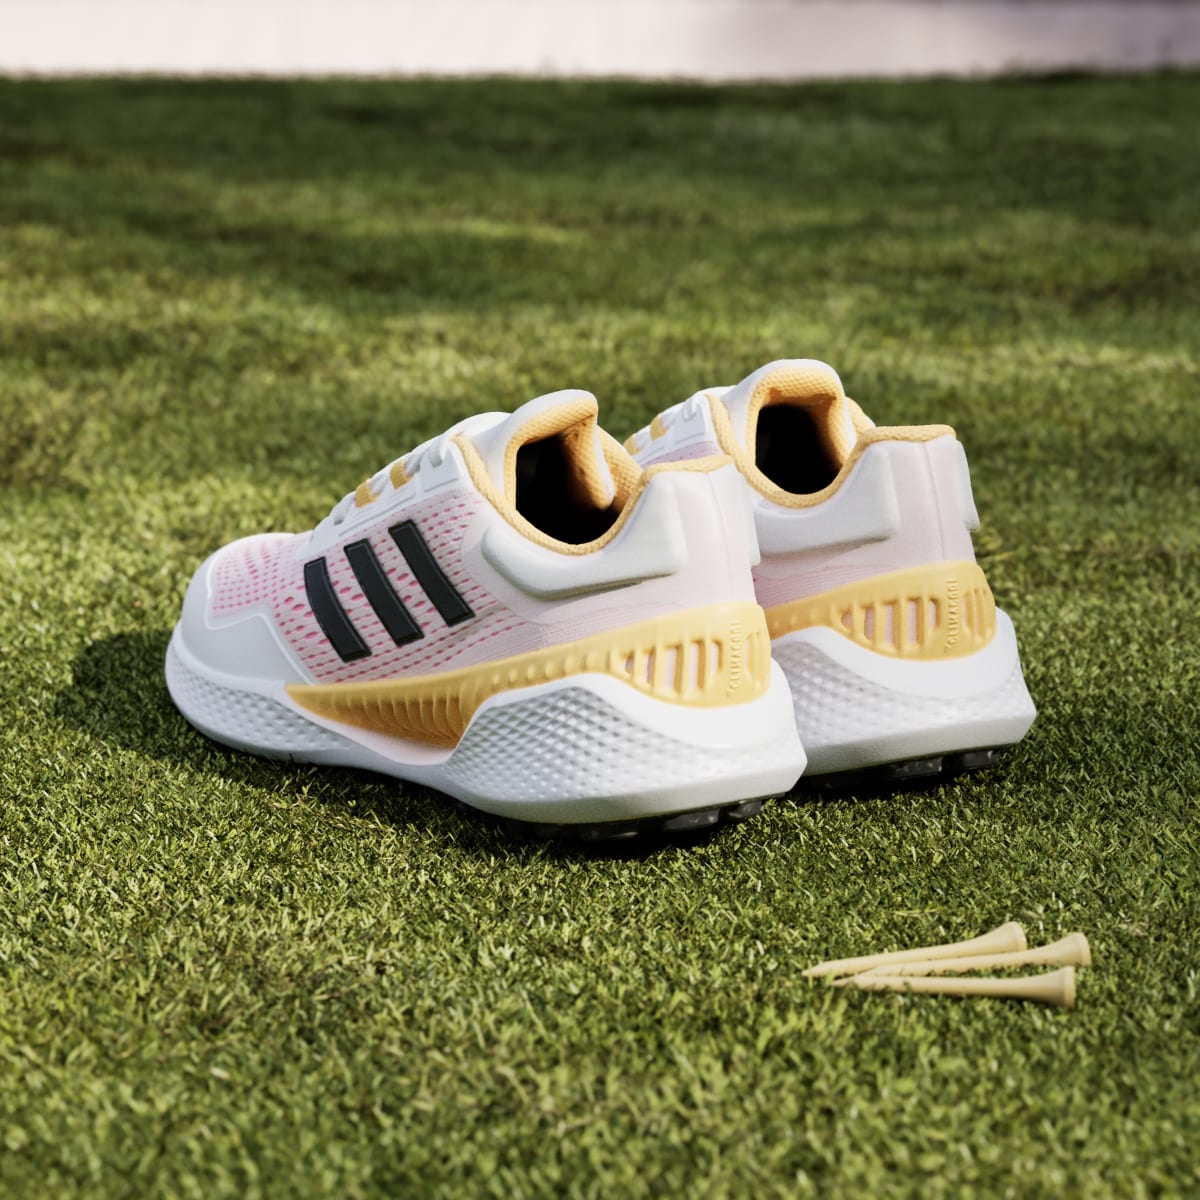 Adidas Summervent 24 Bounce Golf Shoes Low. 5